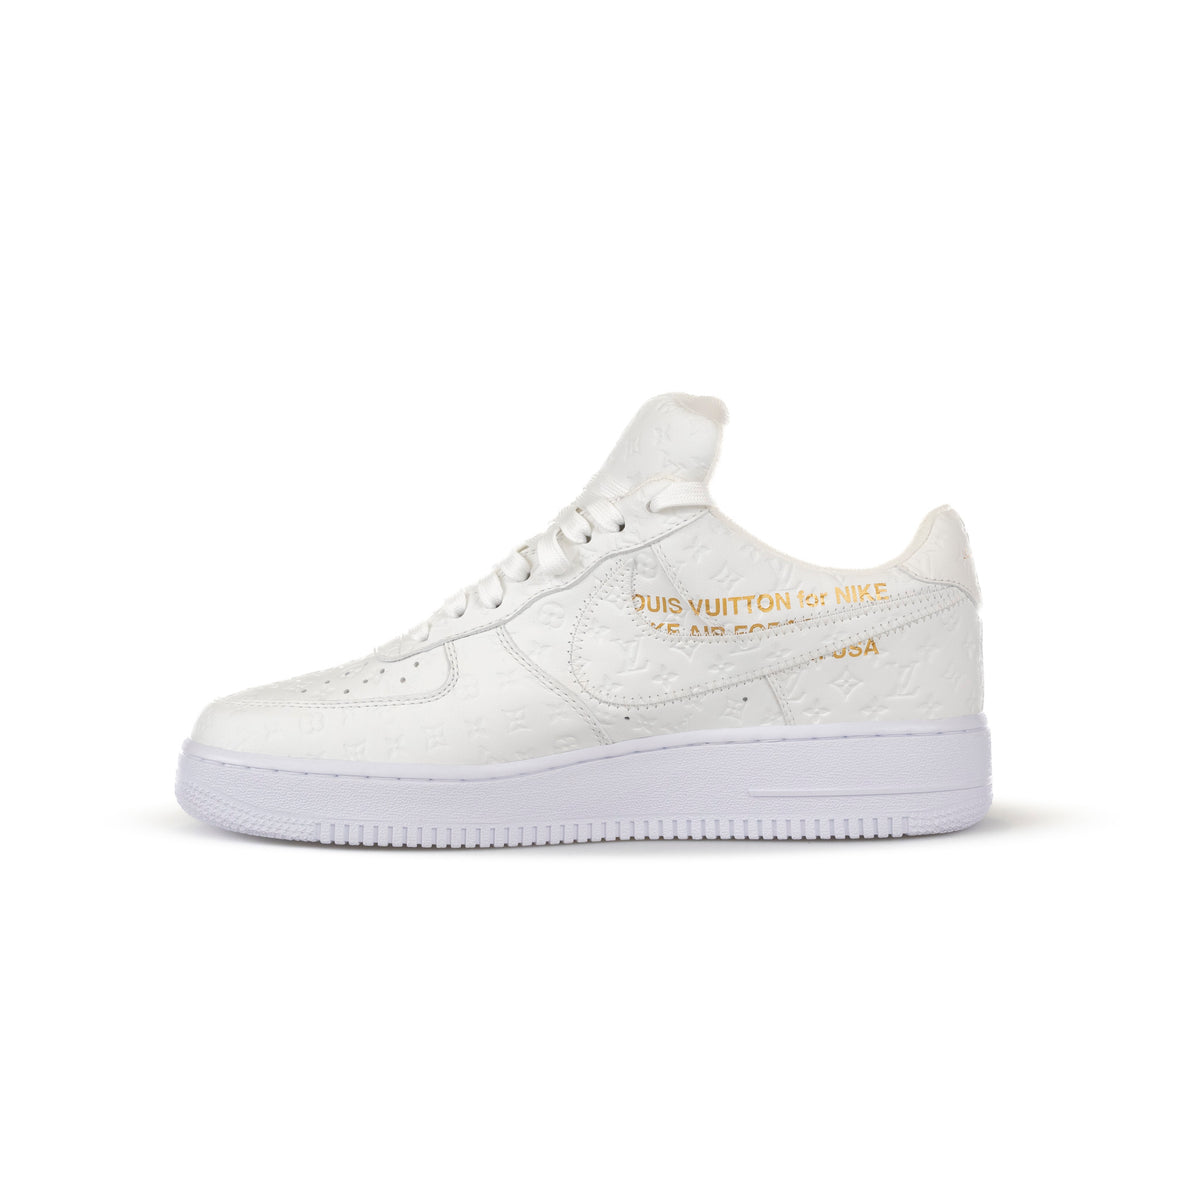 Louis Vuitton Nike Air Force 1 Low by Virgirl Abloh White